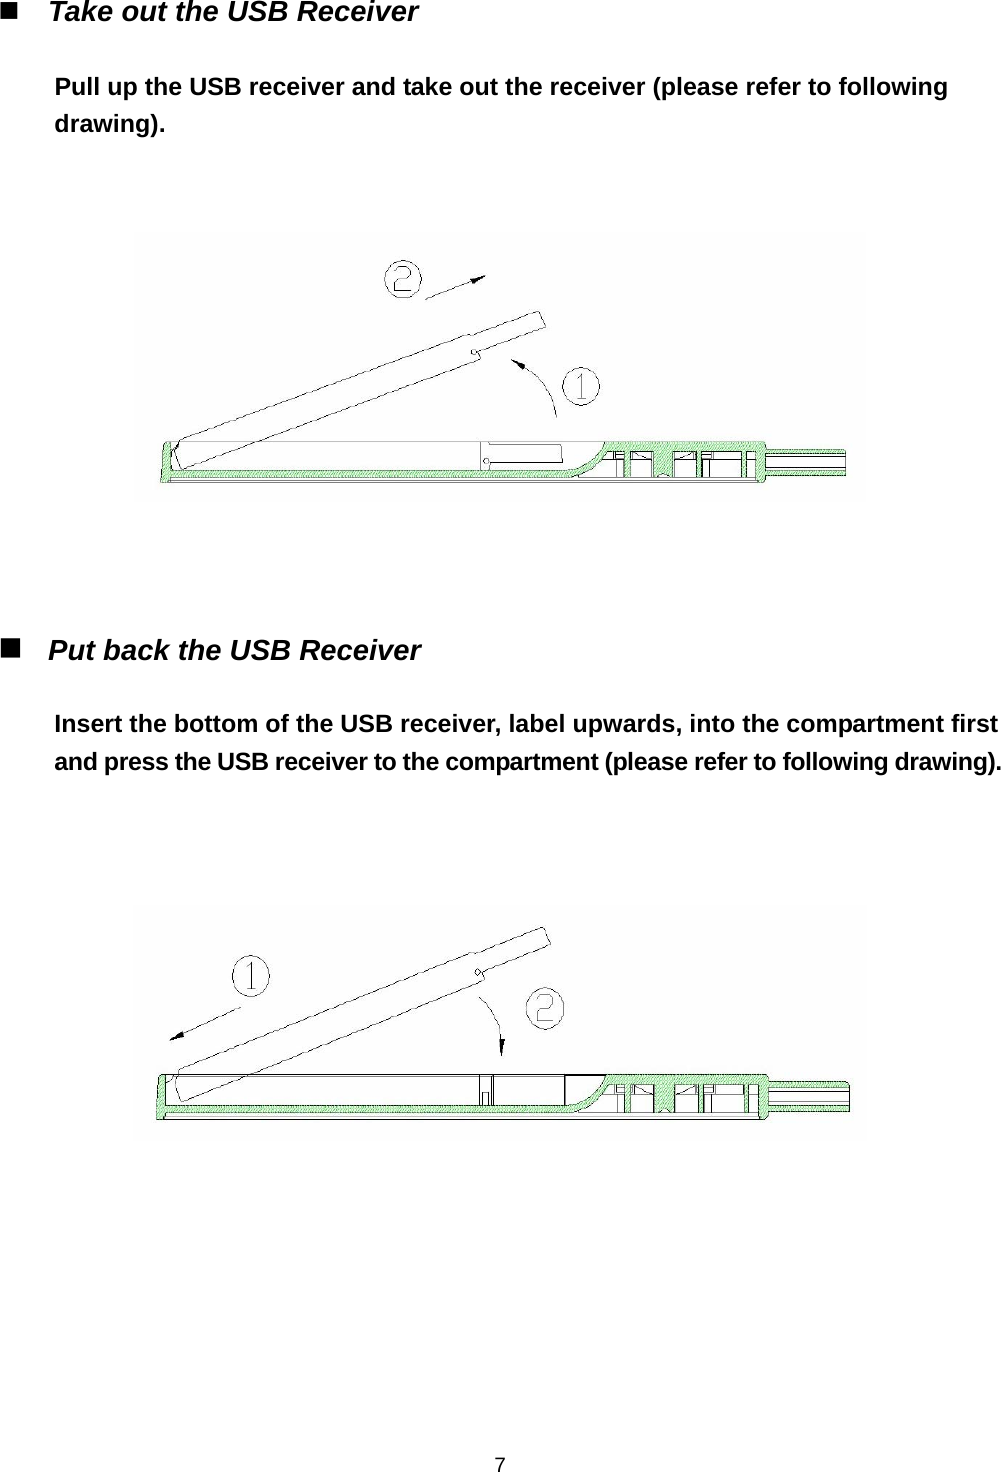    7 Take out the USB Receiver    Pull up the USB receiver and take out the receiver (please refer to following drawing).        Put back the USB Receiver    Insert the bottom of the USB receiver, label upwards, into the compartment first and press the USB receiver to the compartment (please refer to following drawing).         